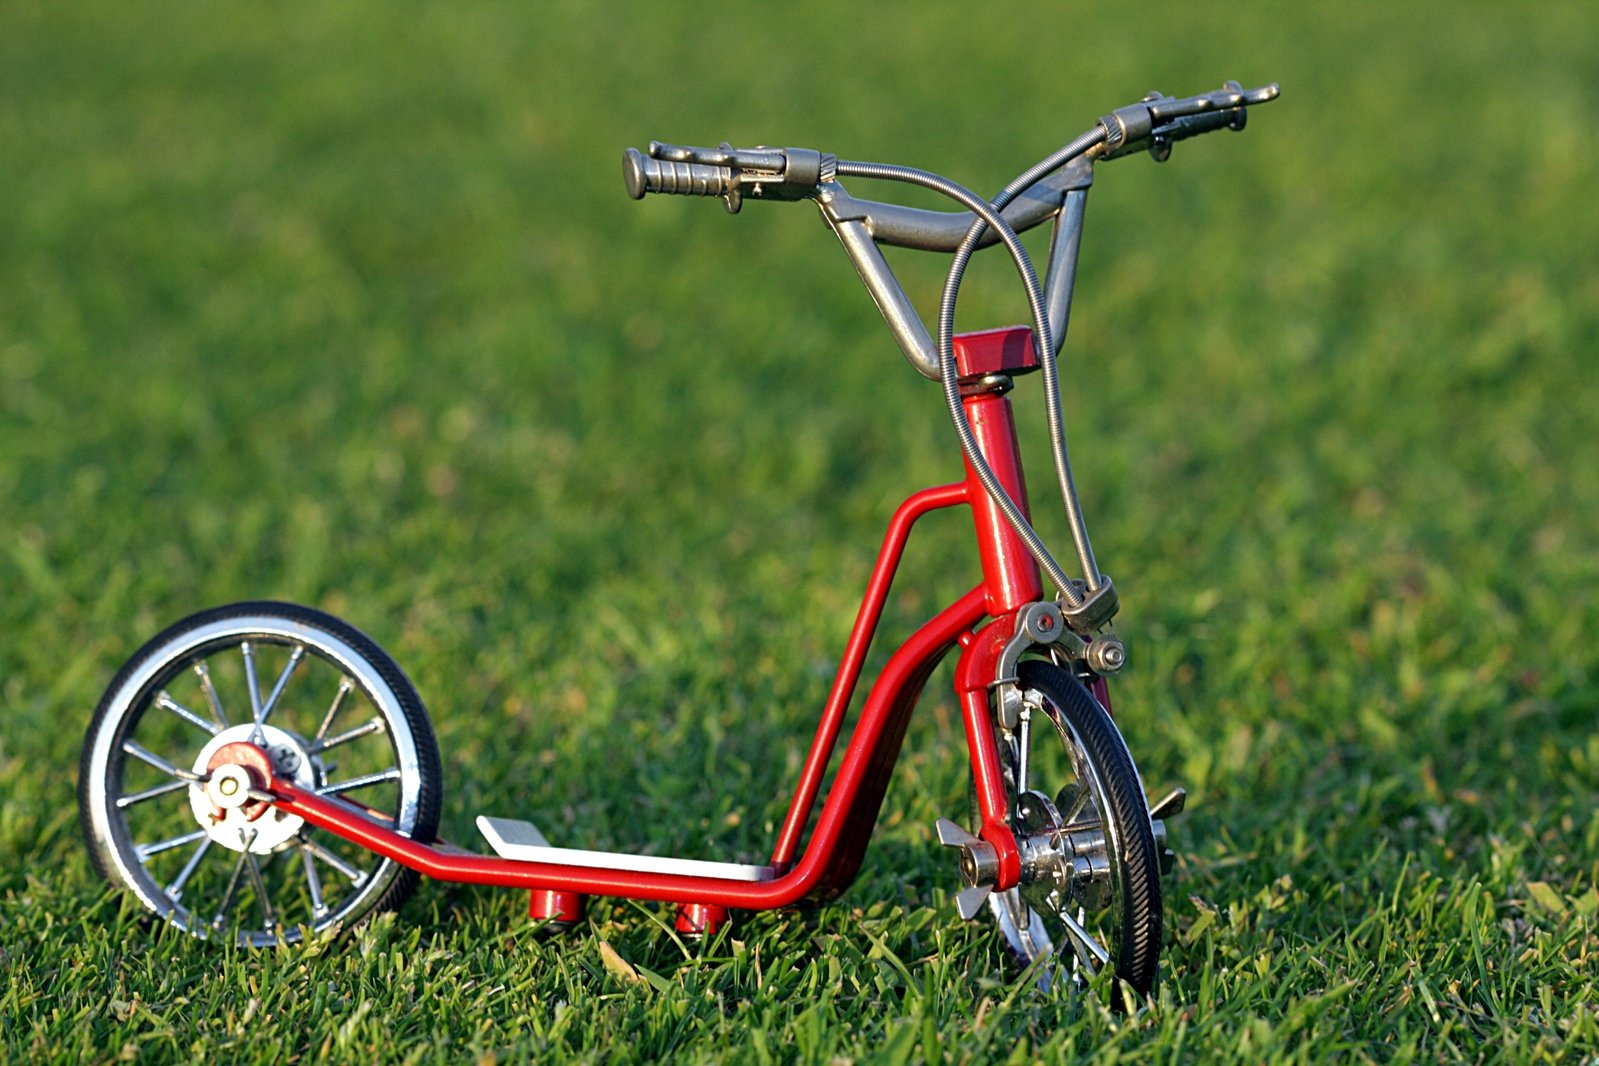 a small model bike laying in the grass